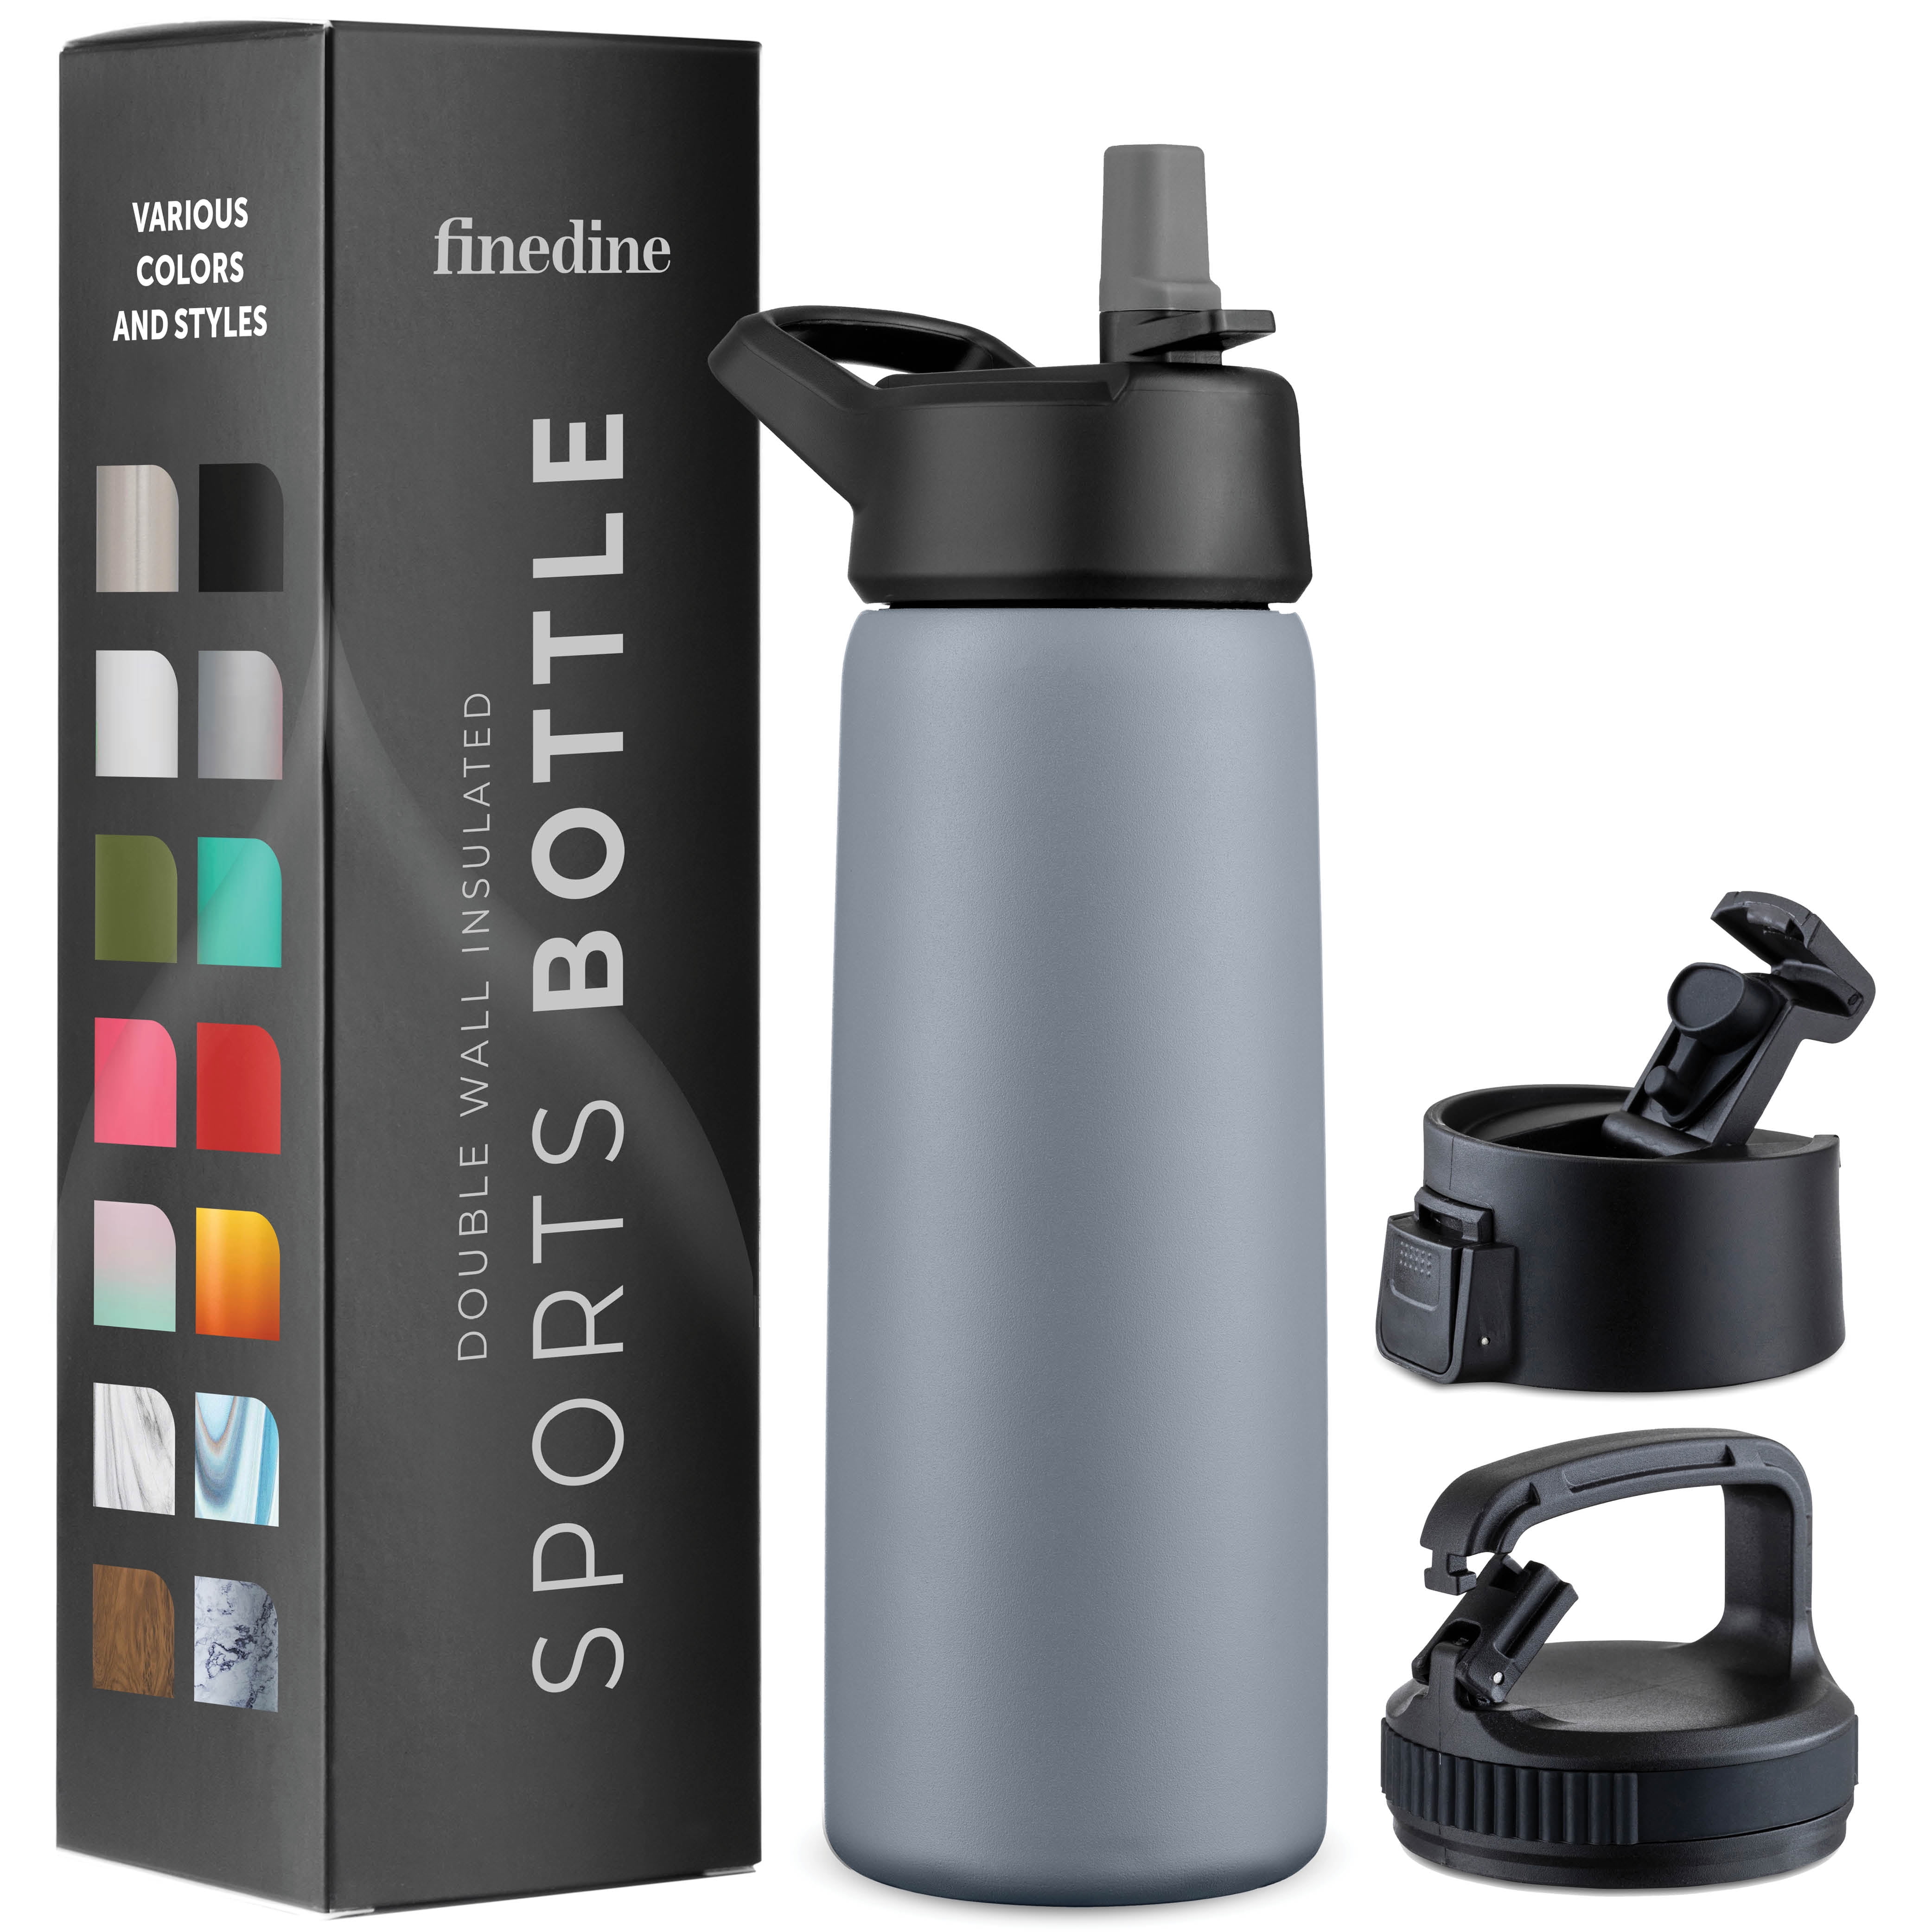  Rivers Edge Products Insulated Metal Water Bottle, Stainless  Steel Thermal Vacuum Flask, Unique Bullet Tumbler for Hiking, Traveling, or  Workout, 34 oz, Rifle Cartridge : Sports & Outdoors